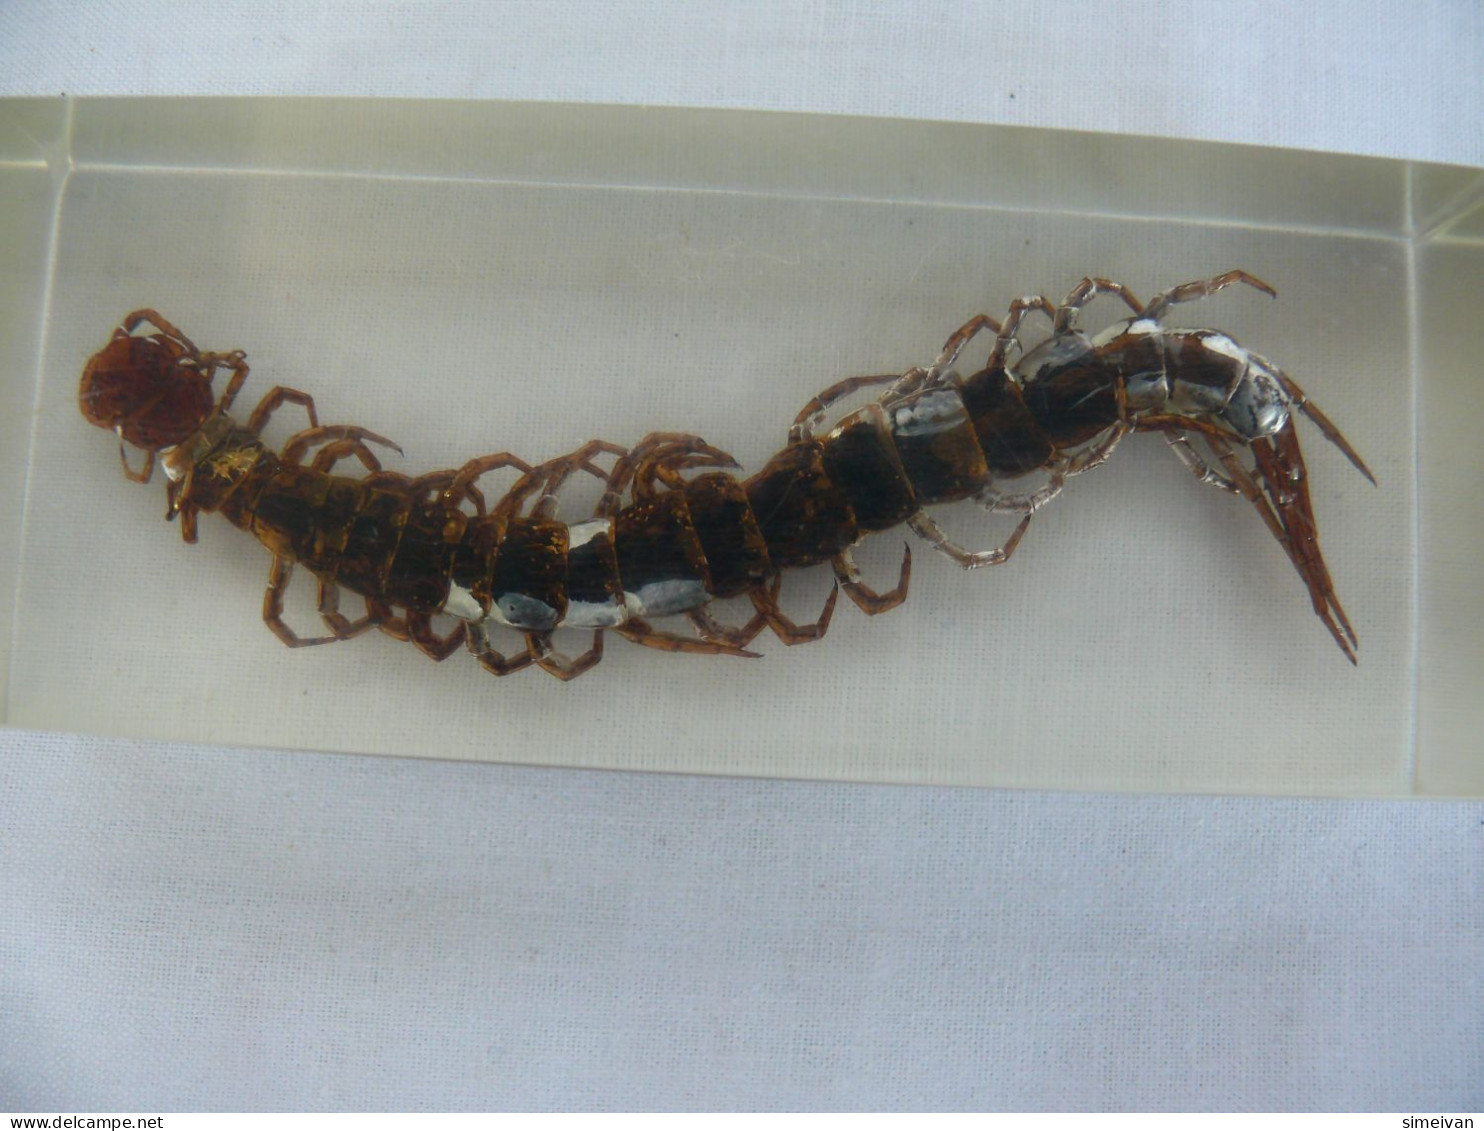 Large  Centipede Scolopendra subspinipes Education Insect Specimen   #2115